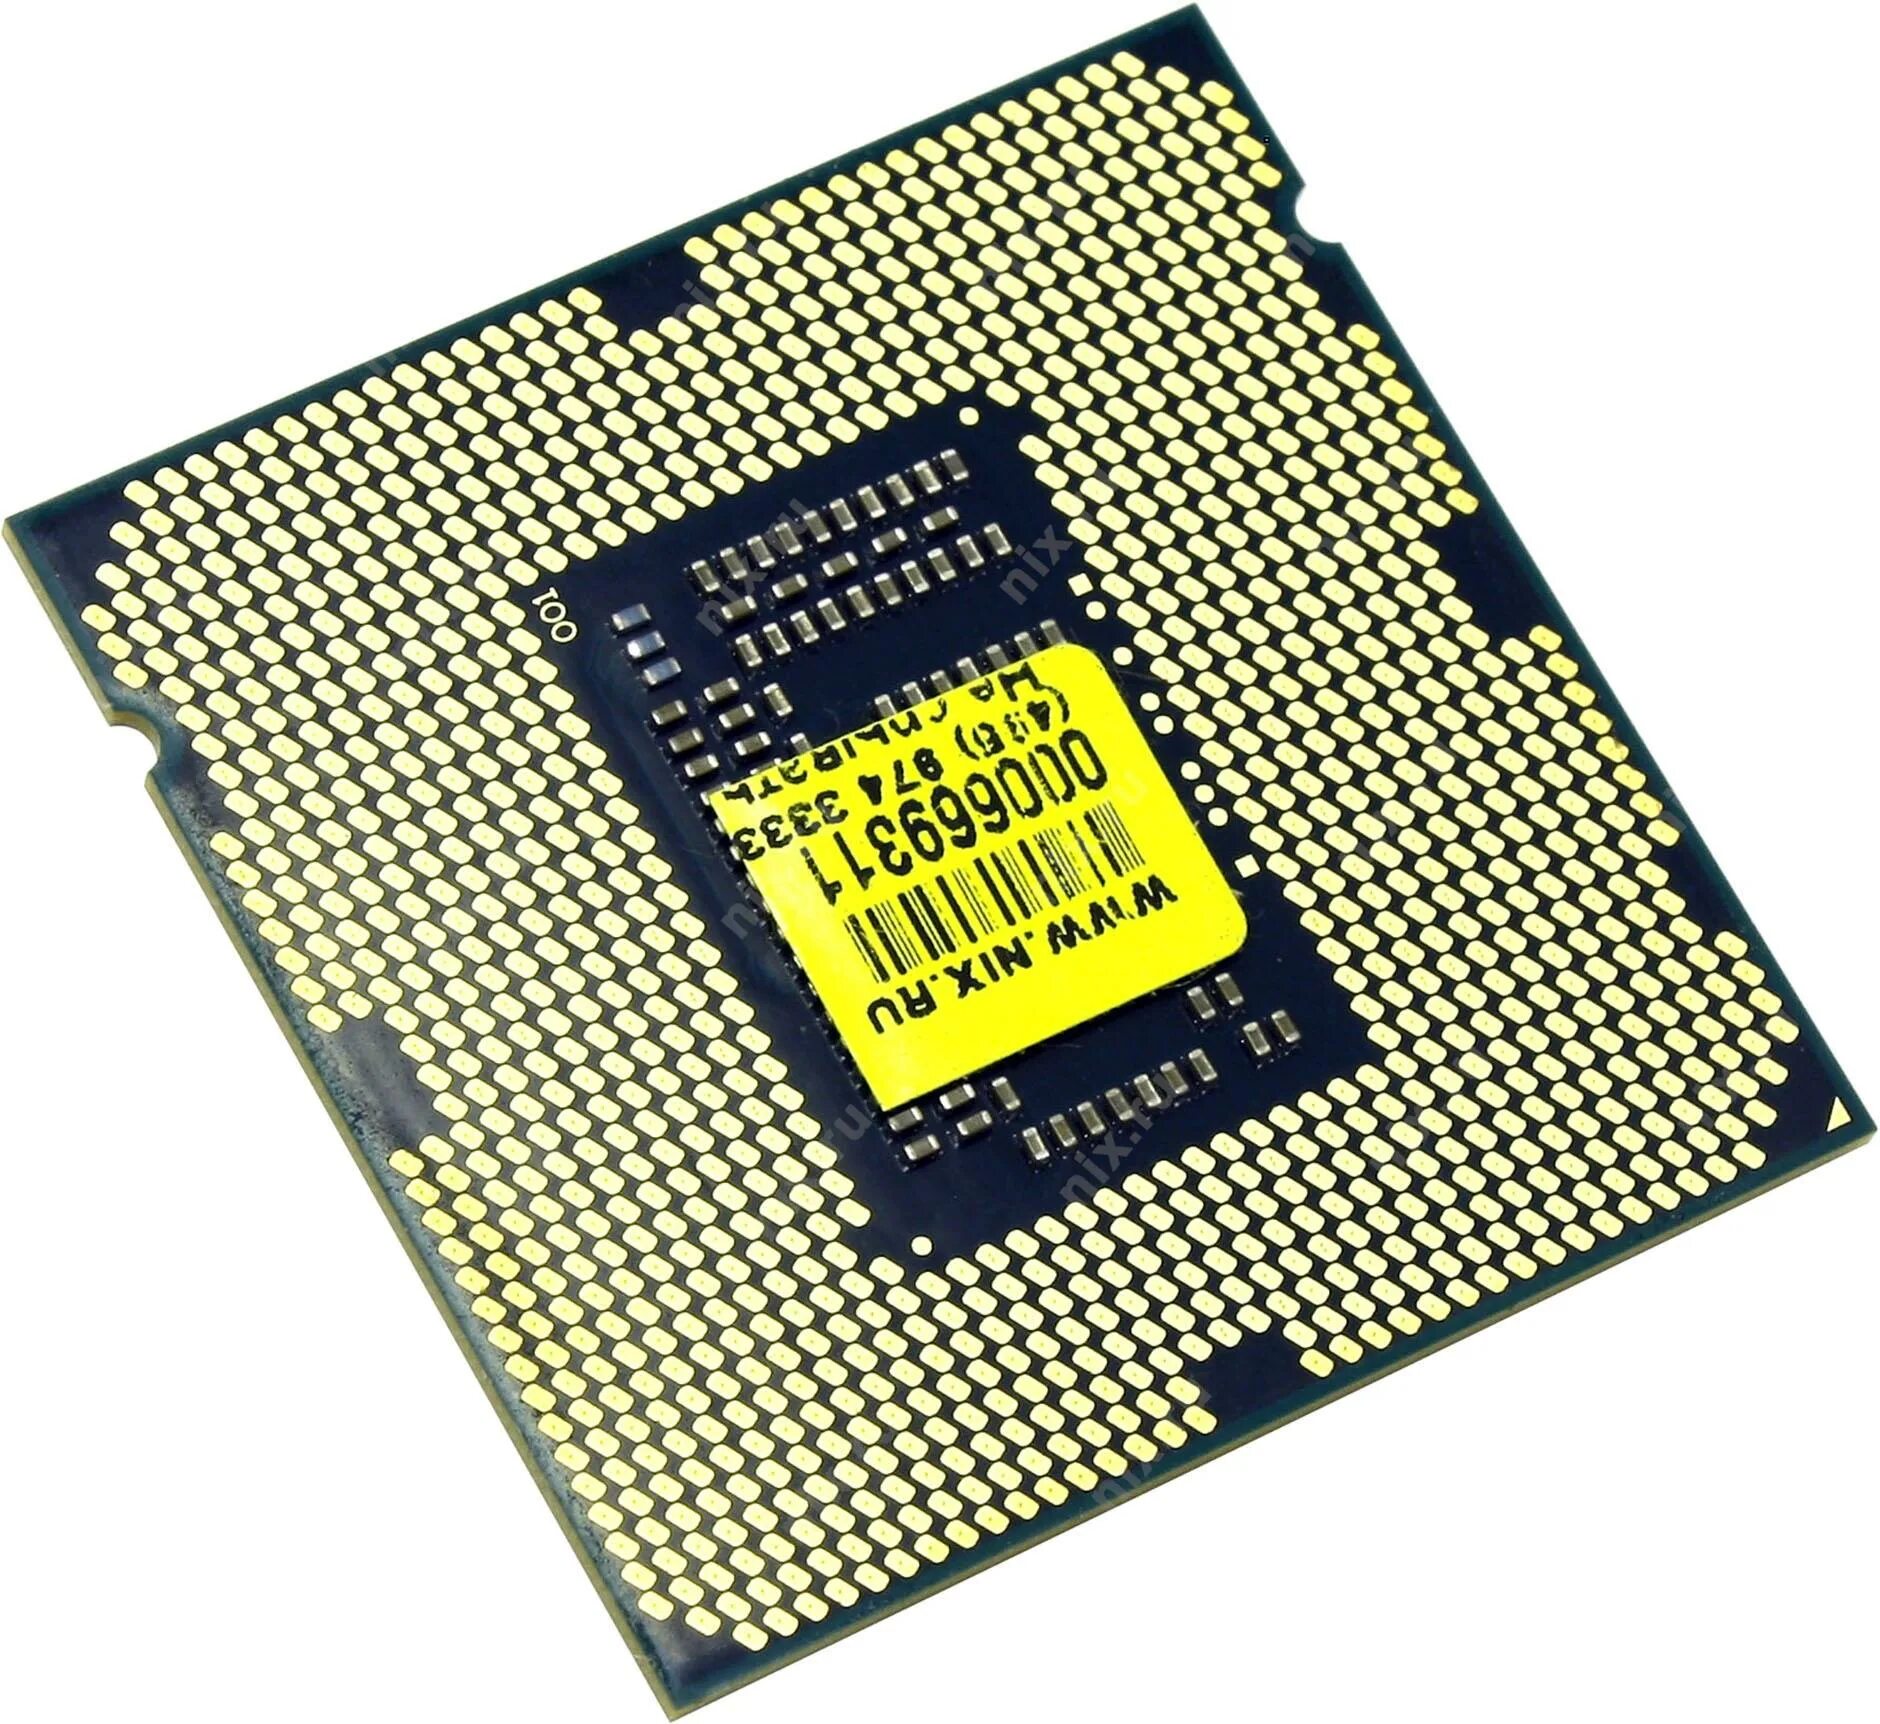 Intel Core i5 3570. Core i5-3570k. Intel Core i5-3570k (3.4 ГГЦ). I5-3570k 3.4 GHZ 4 Core. 3570 сокет